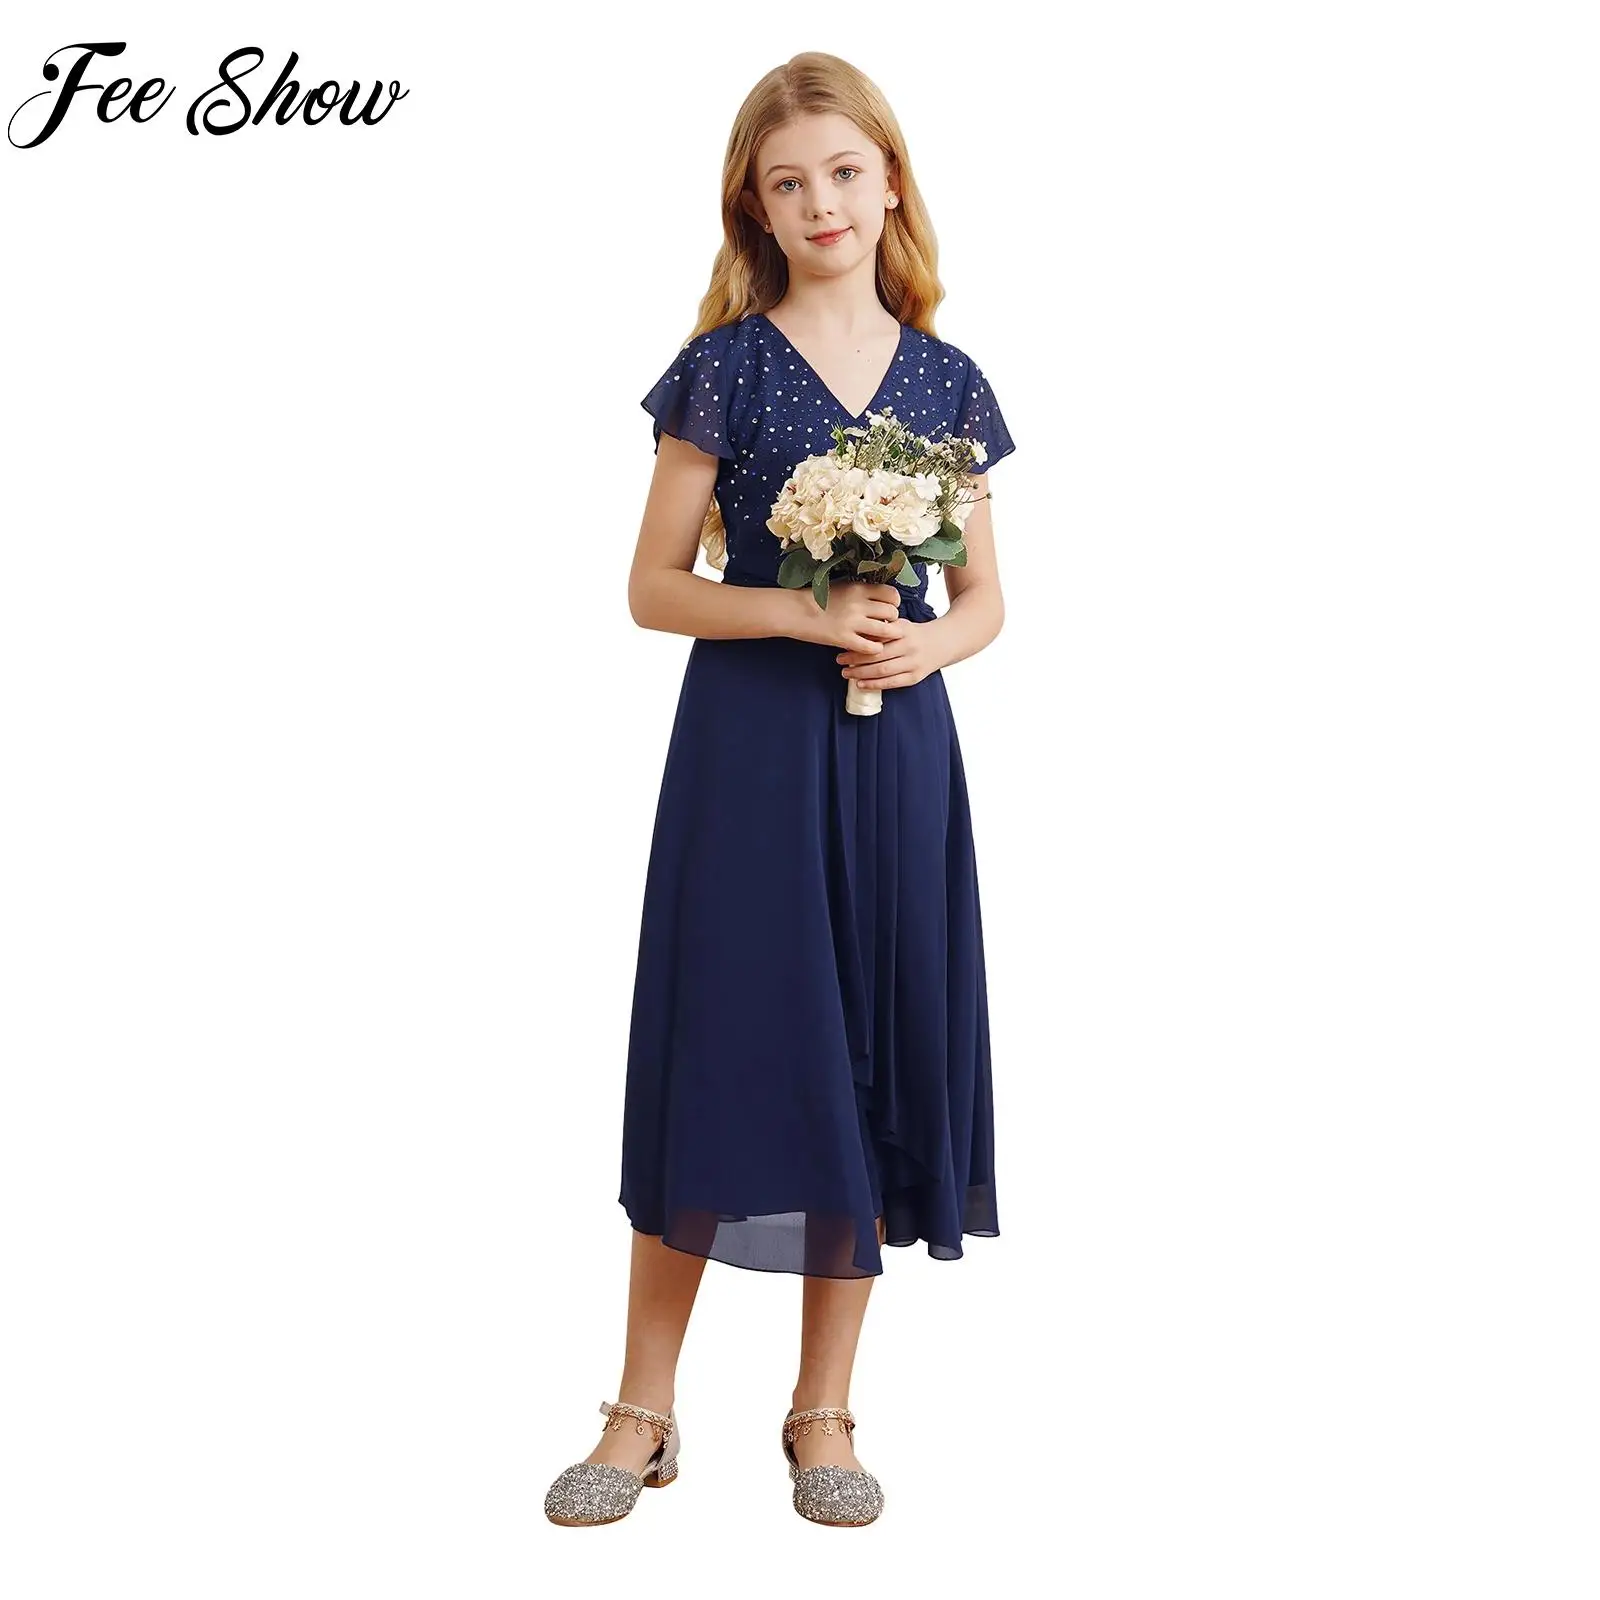 

Kids Dress for Young Girls Wedding Party Gown Rhinestone Formal Dress for Bridesmaid Evening Prom Formal Ceremonial Vestidos